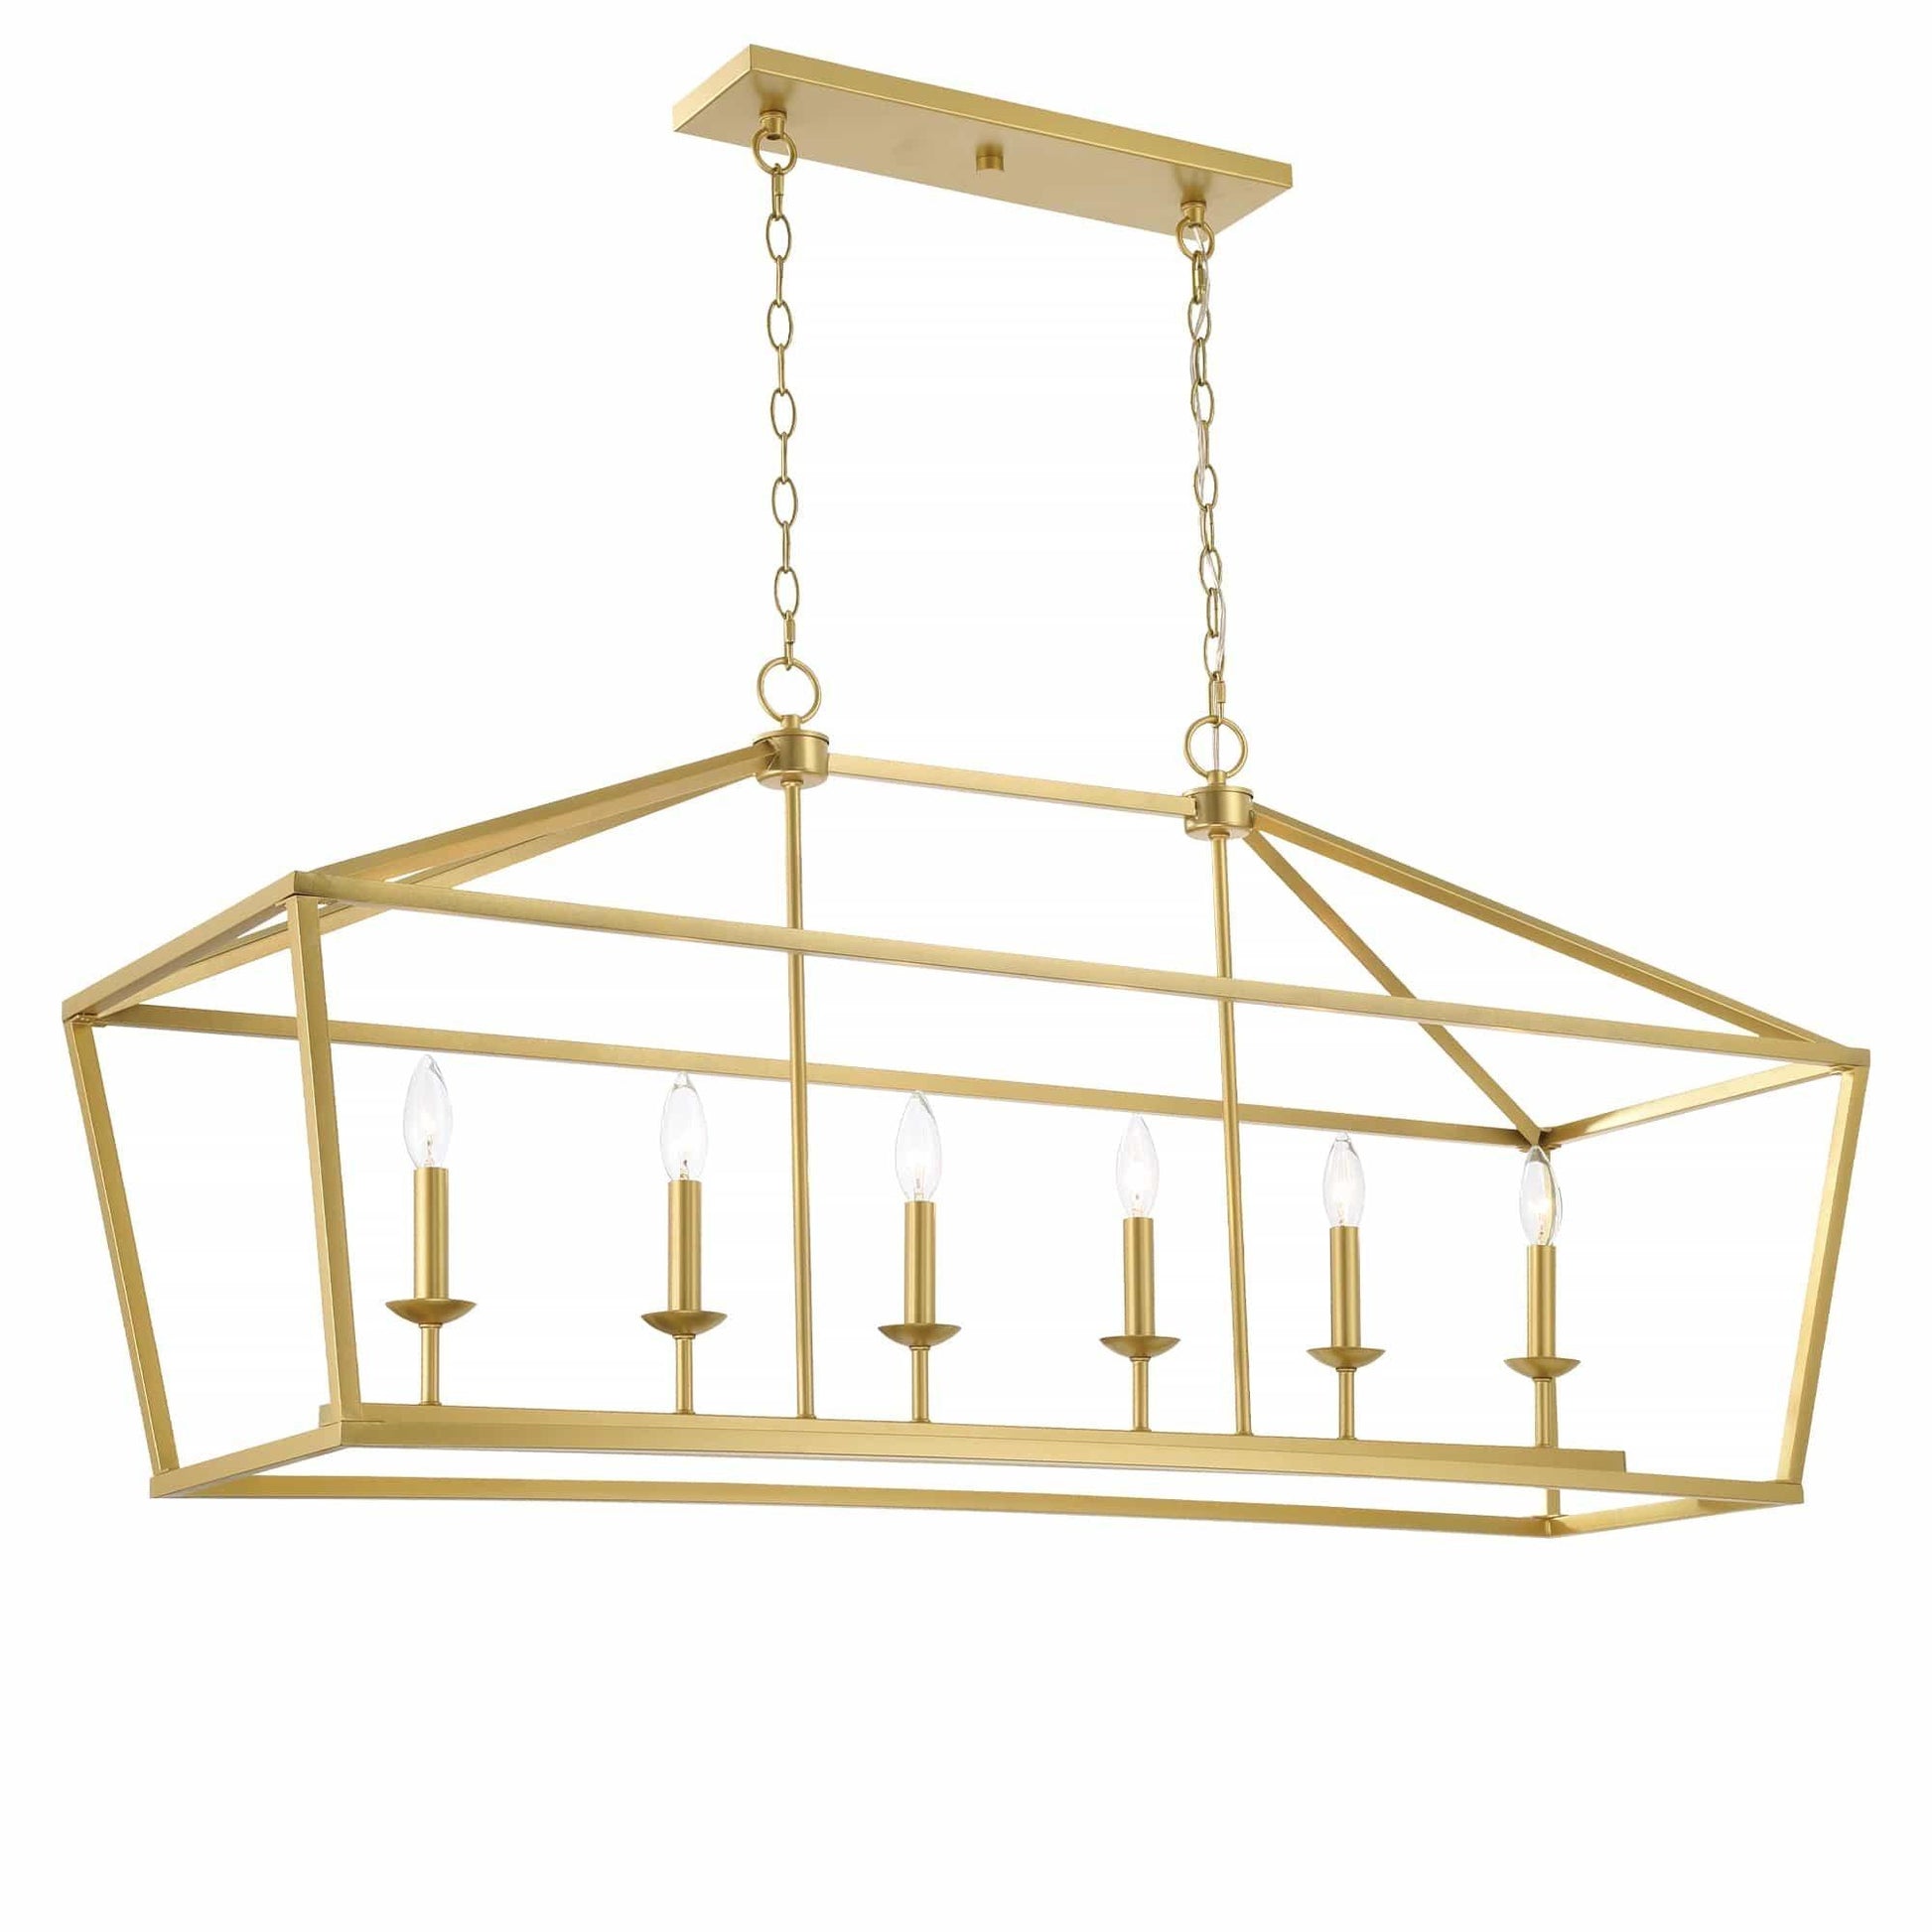 6 light linear kitchen island chandelier (10) by ACROMA